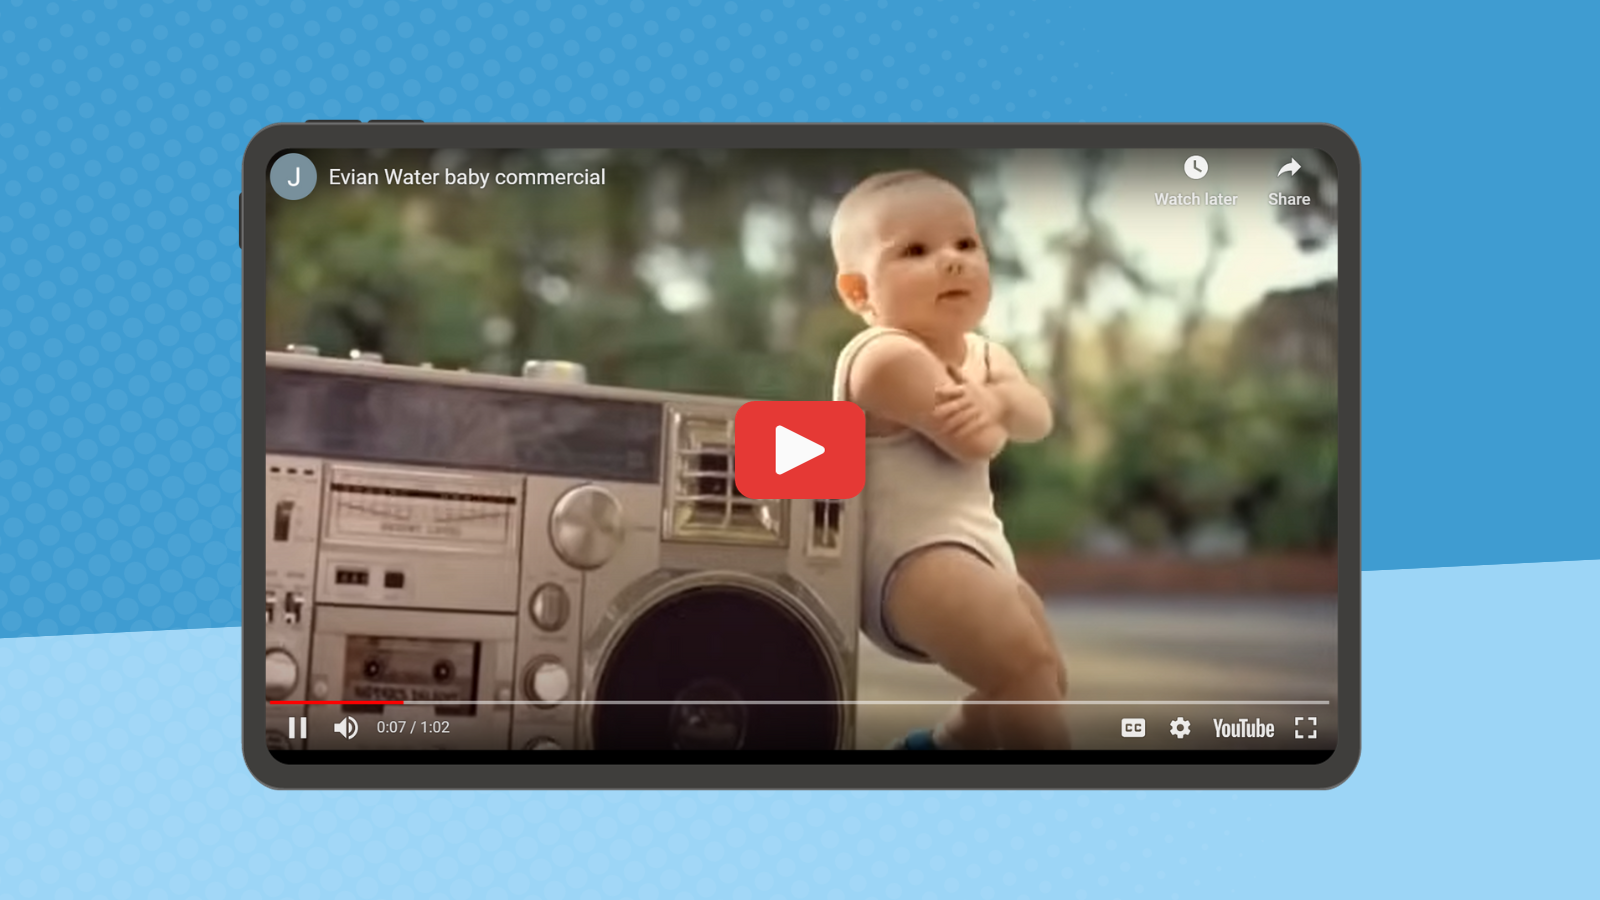 Ipad showing funny kids video of baby leaning on boombox.